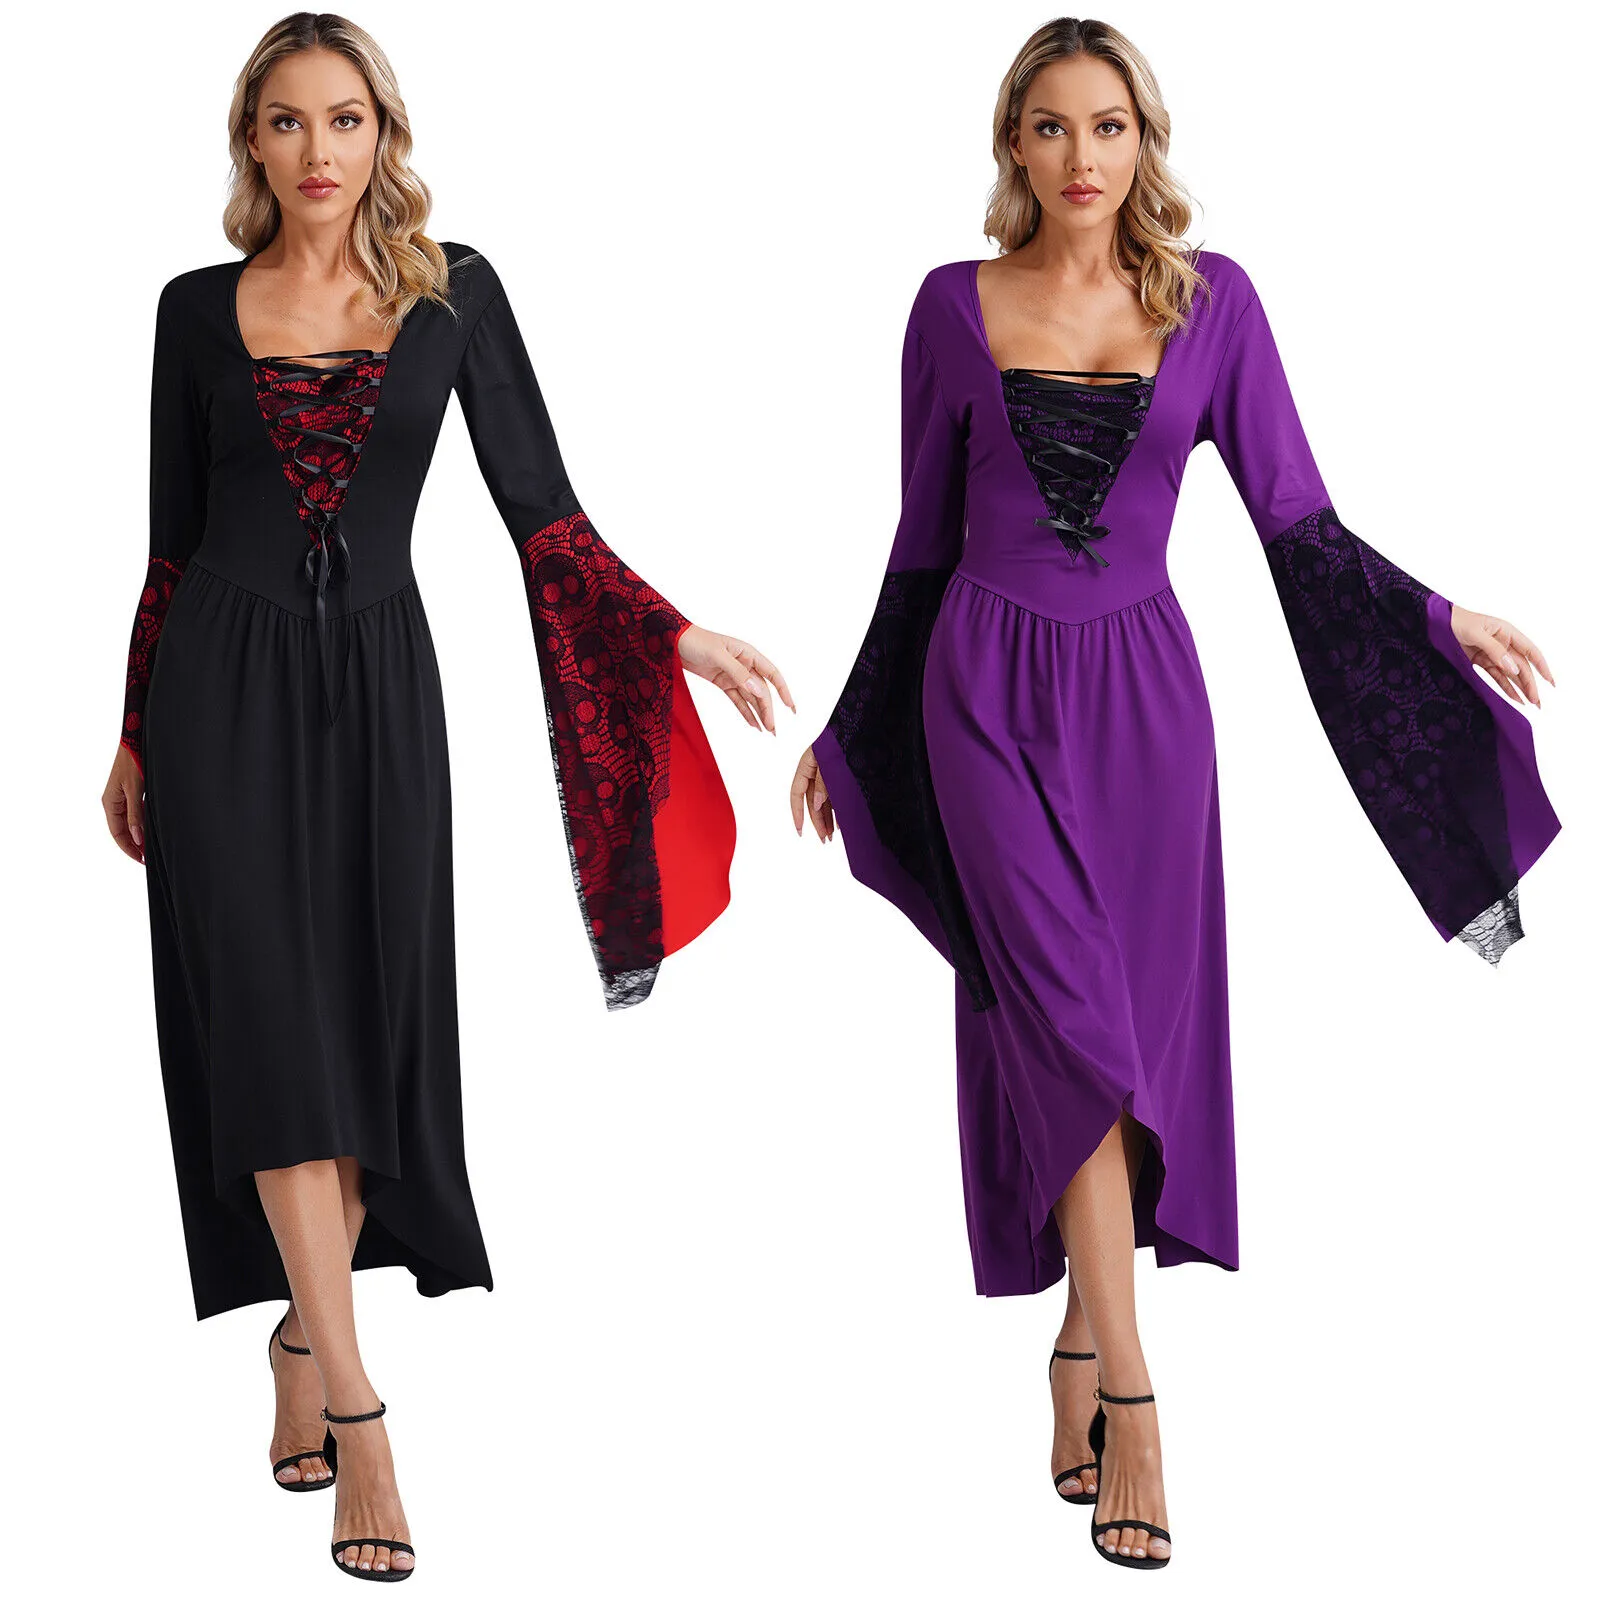 Donne Vampire Ghost Ghost Medieval Halloween cosplay abito vintage gotico 5xl